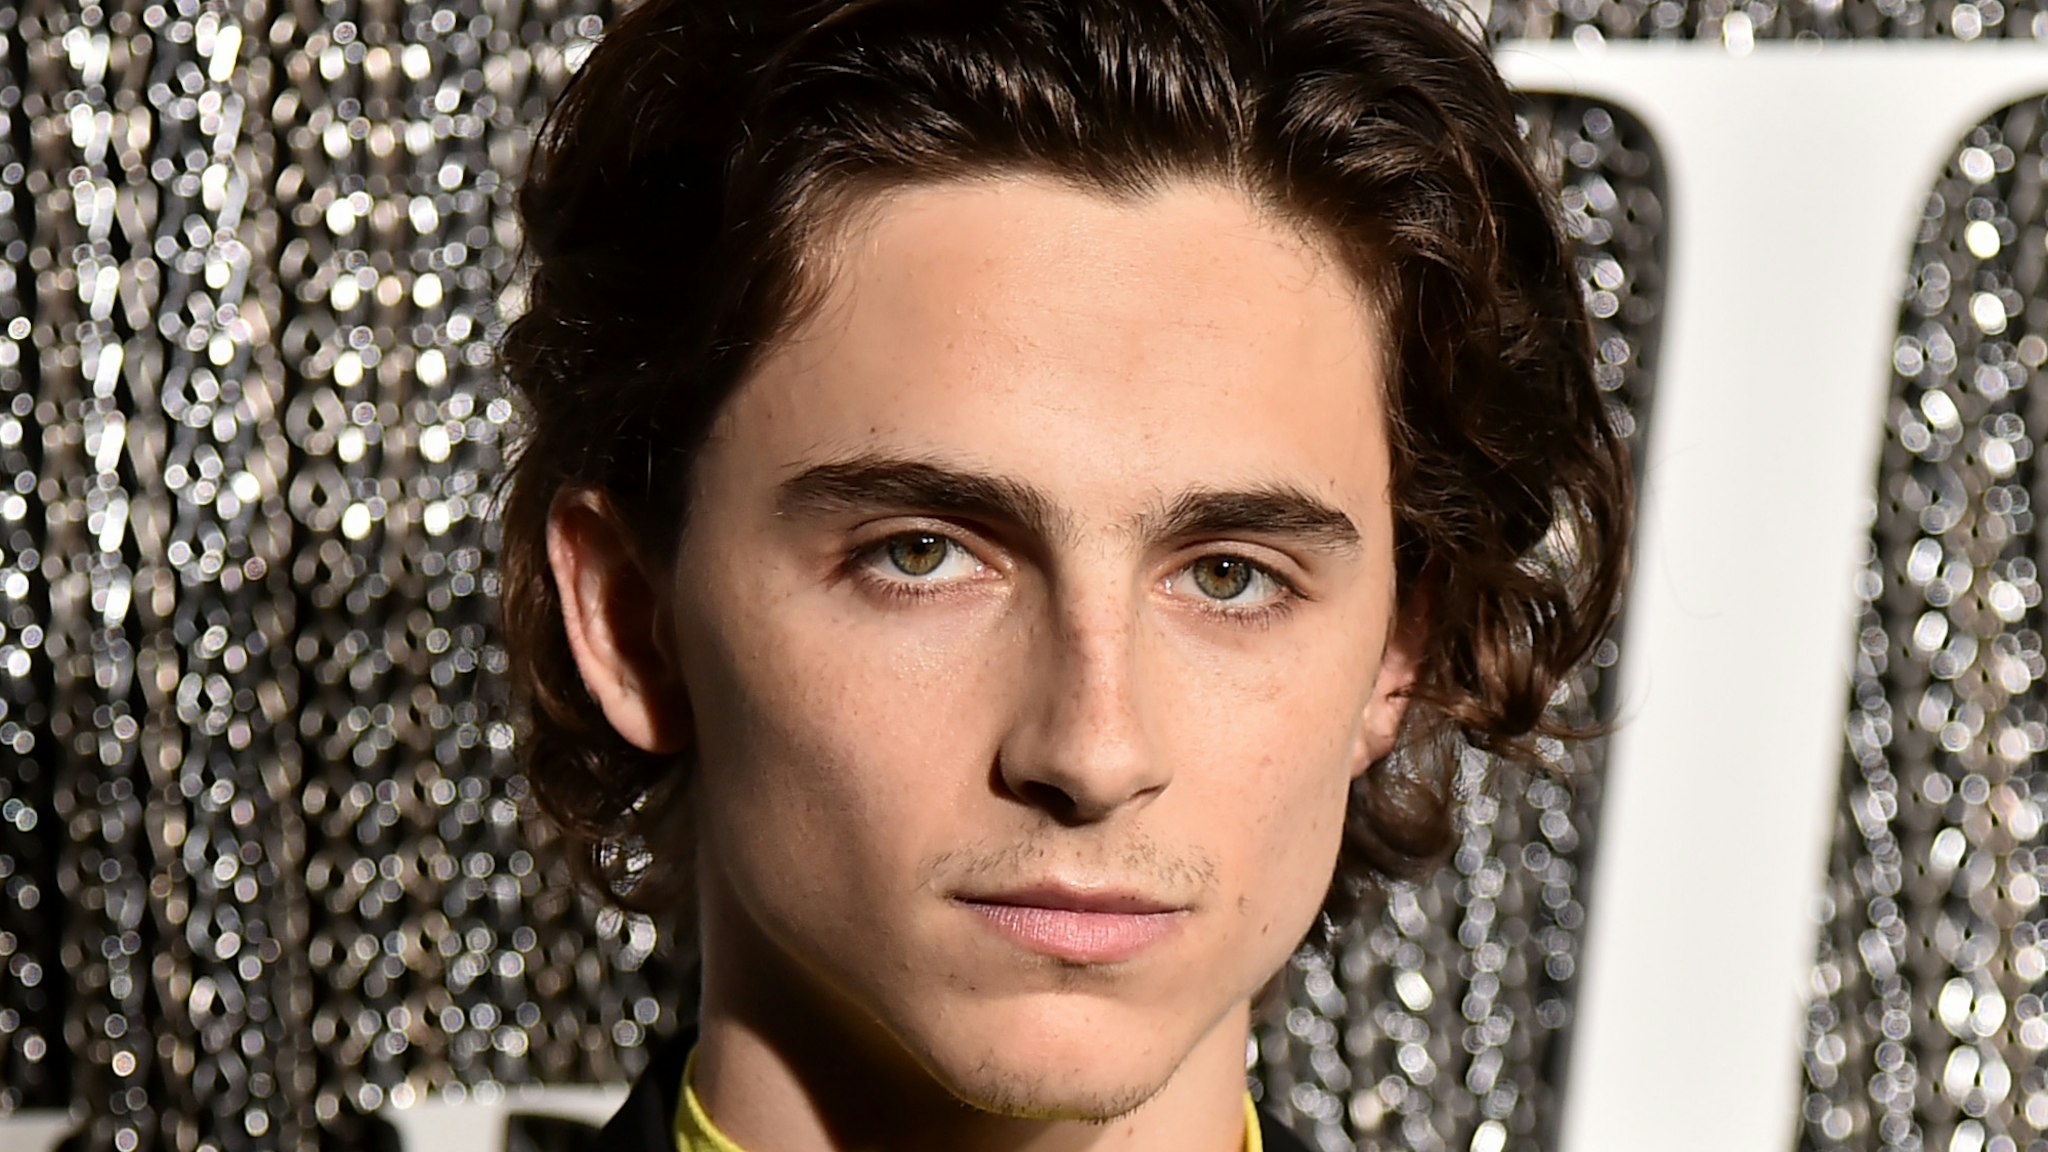 Timothee Chalamet attends "The King" New York Premiere at SVA Theater on October 01, 2019 in New York City.